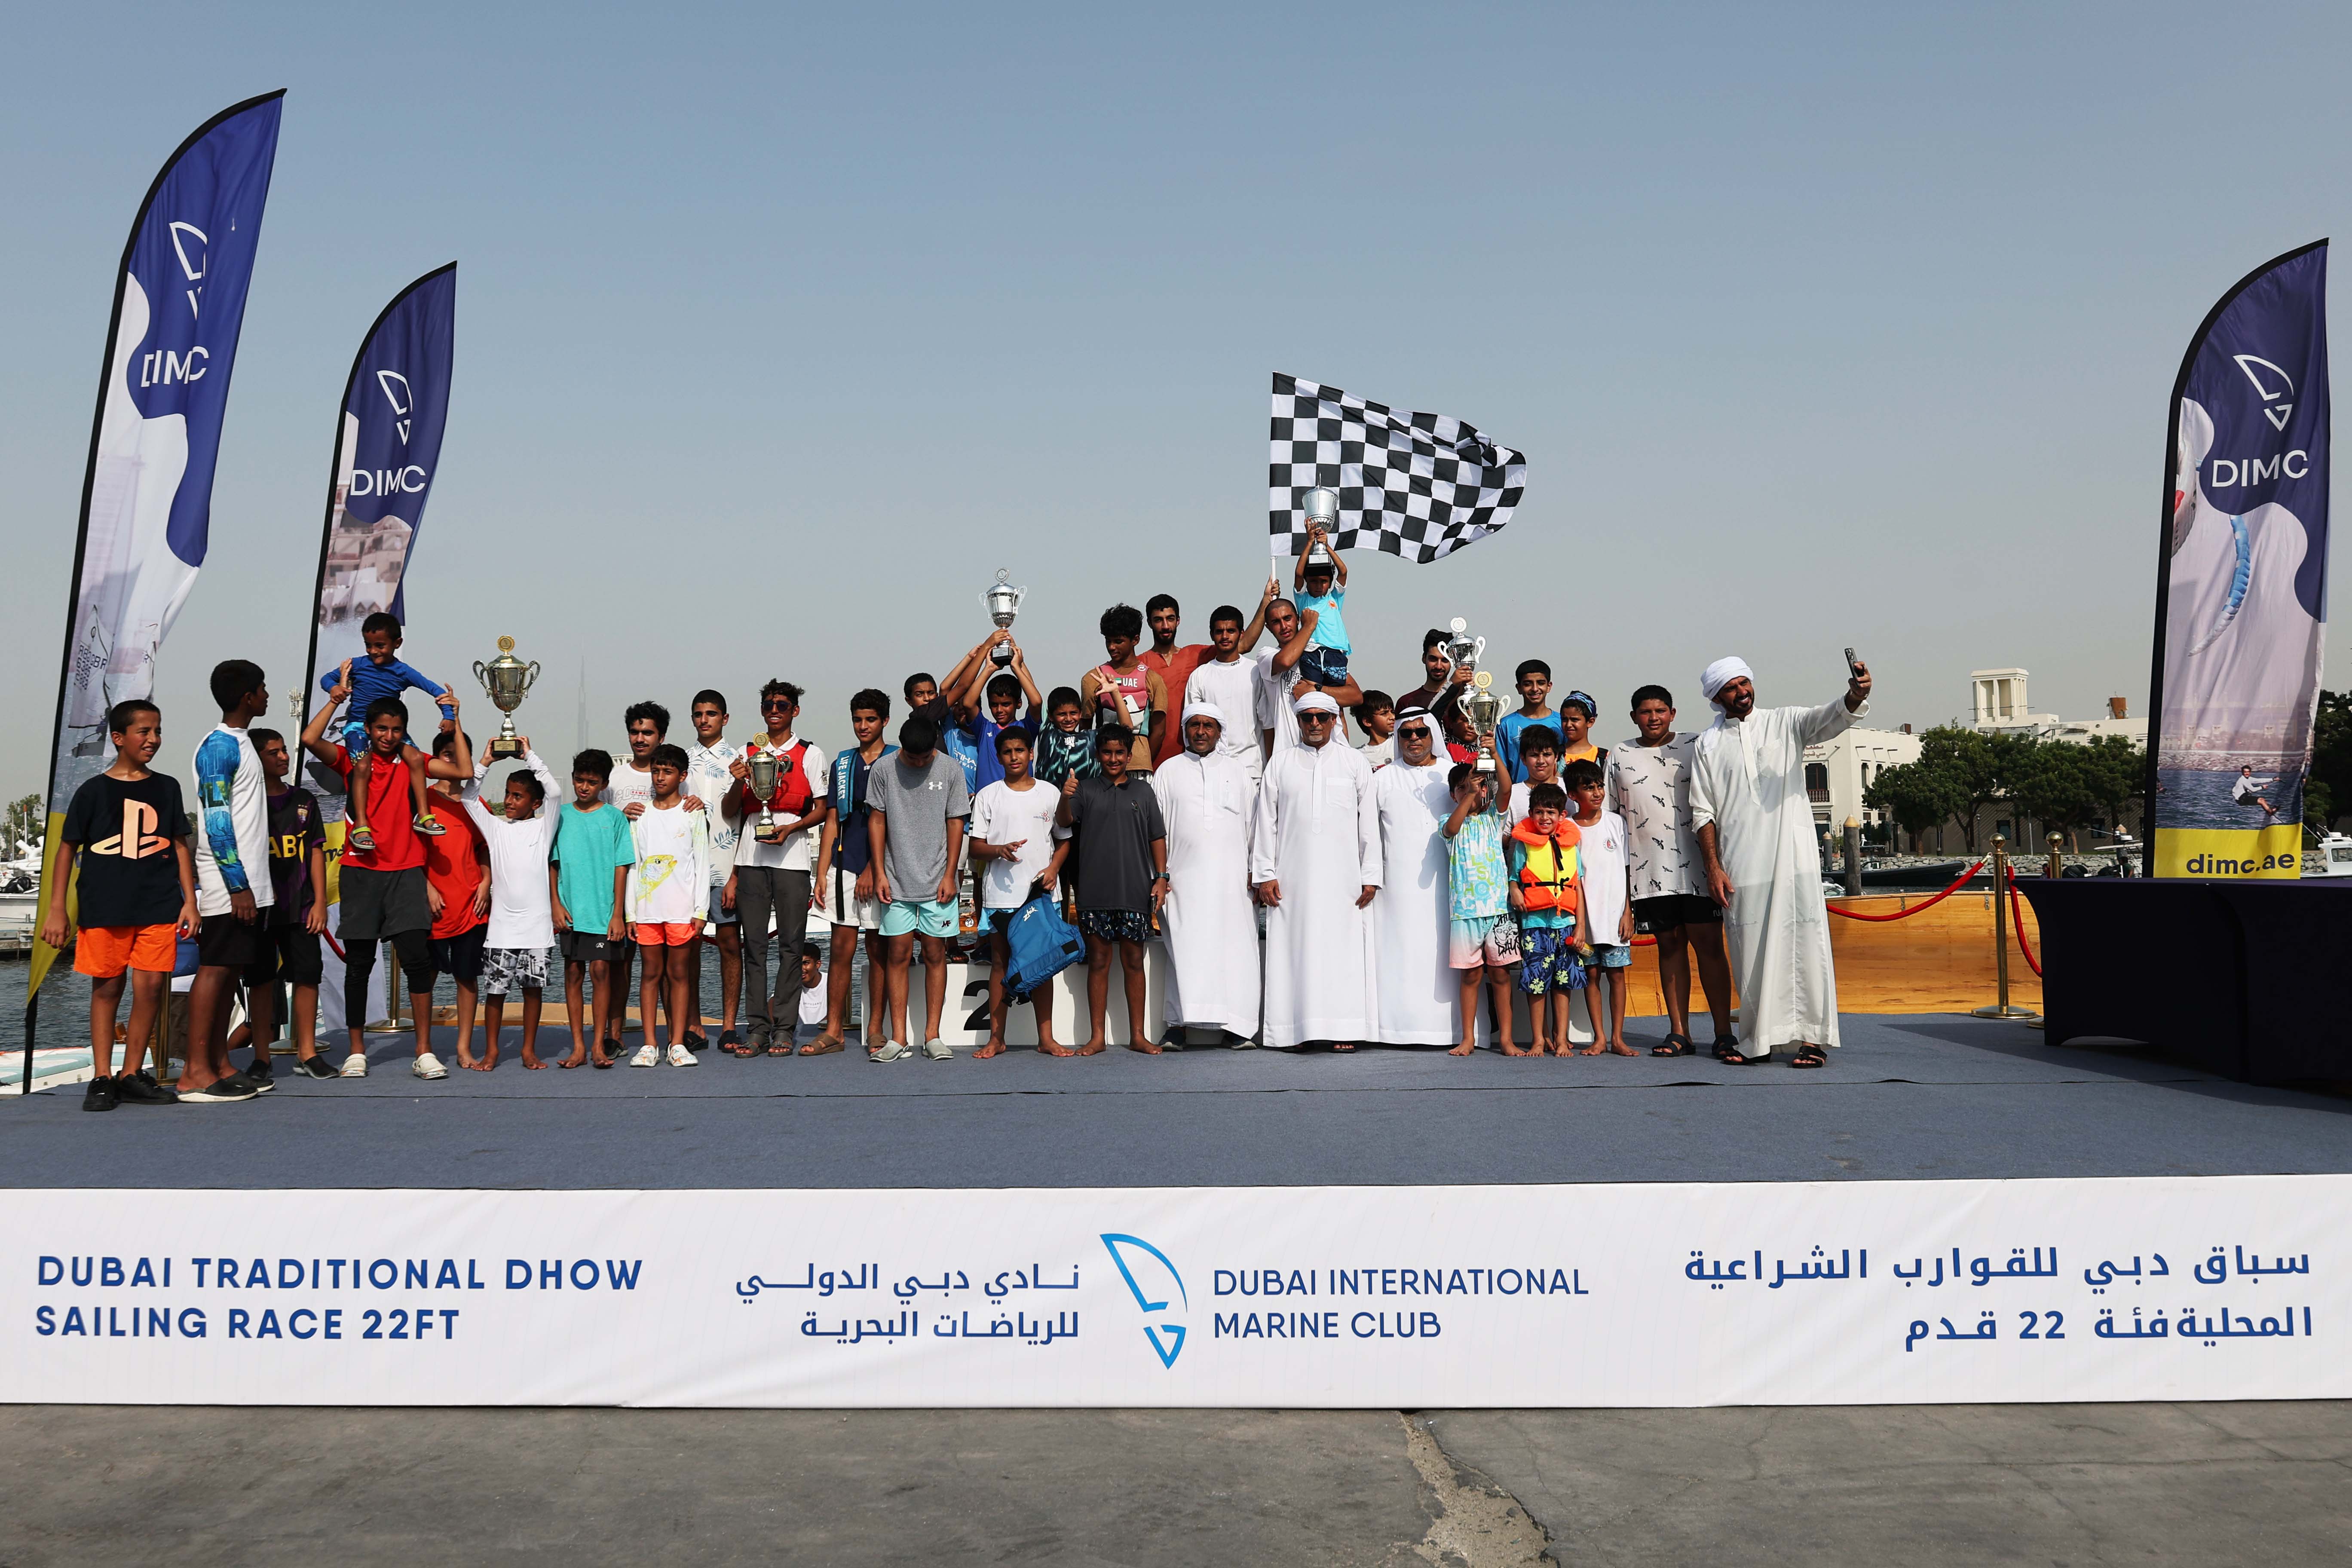 Zilzal 77 tops the Youth Categories in 22ft Dhow Sailing Race